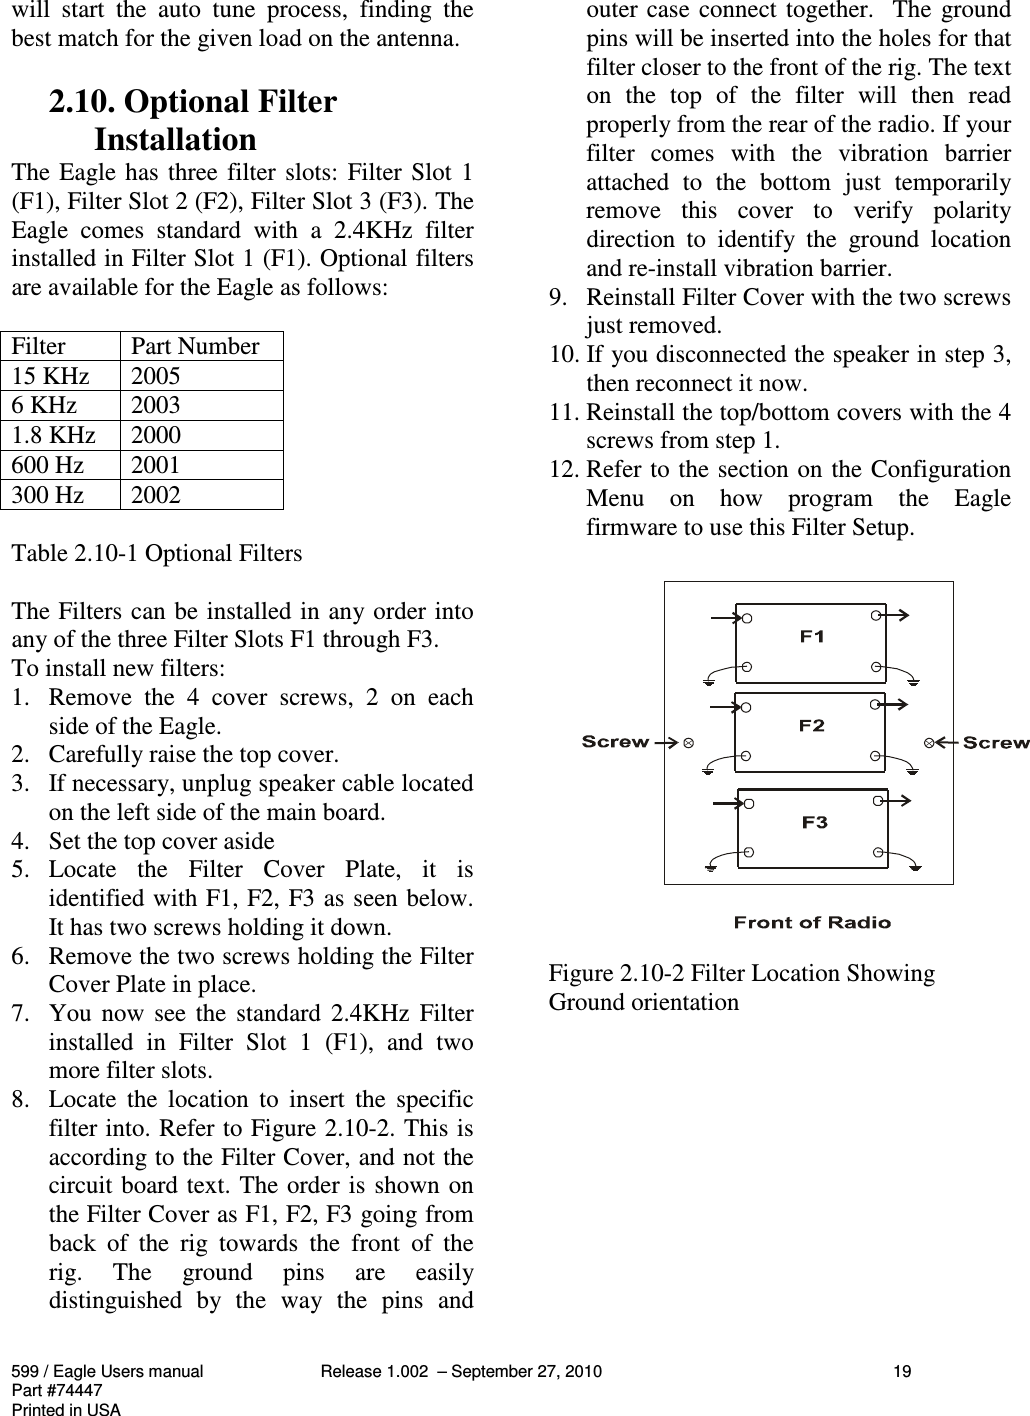 599 / Eagle Users manual Release 1.002  – September 27, 2010 19Part #74447Printed in USAwill  start  the  auto  tune  process,  finding  thebest match for the given load on the antenna.2.10. Optional FilterInstallationThe Eagle has three filter slots: Filter Slot 1(F1), Filter Slot 2 (F2), Filter Slot 3 (F3). TheEagle  comes  standard  with  a  2.4KHz  filterinstalled in Filter Slot 1 (F1). Optional filtersare available for the Eagle as follows:Filter Part Number15 KHz 20056 KHz 20031.8 KHz 2000600 Hz 2001300 Hz 2002Table 2.10-1 Optional FiltersThe Filters can be installed in any order intoany of the three Filter Slots F1 through F3.To install new filters:1. Remove  the  4  cover  screws,  2  on  eachside of the Eagle.2. Carefully raise the top cover.3. If necessary, unplug speaker cable locatedon the left side of the main board.4. Set the top cover aside5. Locate  the  Filter  Cover  Plate,  it  isidentified with F1, F2, F3 as seen below.It has two screws holding it down.6. Remove the two screws holding the FilterCover Plate in place.7. You now see the  standard  2.4KHz  Filterinstalled  in  Filter  Slot  1  (F1),  and  twomore filter slots.8. Locate  the  location  to  insert  the  specificfilter into. Refer to Figure 2.10-2. This isaccording to the Filter Cover, and not thecircuit board text. The order is shown onthe Filter Cover as F1, F2, F3 going fromback  of  the  rig  towards  the  front  of  therig.  The  ground  pins  are  easilydistinguished  by  the  way  the  pins  andouter case connect together.  The groundpins will be inserted into the holes for thatfilter closer to the front of the rig. The texton  the  top  of  the  filter  will  then  readproperly from the rear of the radio. If yourfilter  comes  with  the  vibration  barrierattached  to  the  bottom  just  temporarilyremove  this  cover  to  verify  polaritydirection  to  identify  the  ground  locationand re-install vibration barrier.9. Reinstall Filter Cover with the two screwsjust removed.10. If you disconnected the speaker in step 3,then reconnect it now.11. Reinstall the top/bottom covers with the 4screws from step 1.12. Refer to the section on the ConfigurationMenu  on  how  program  the  Eaglefirmware to use this Filter Setup.Figure 2.10-2 Filter Location ShowingGround orientation